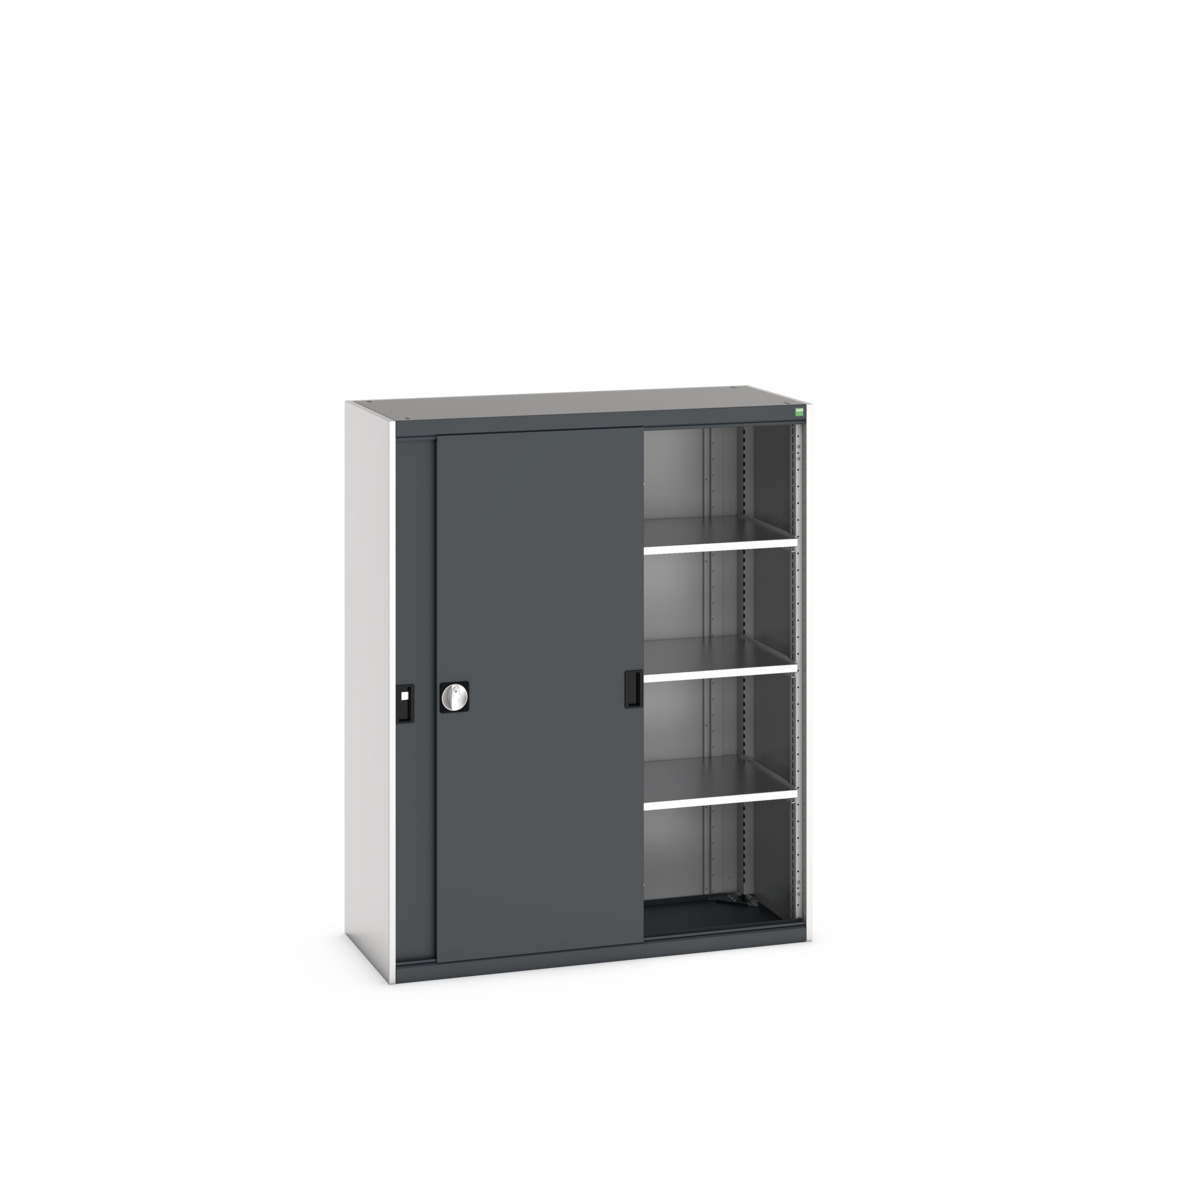 40014064.19V - Armoire Cubio SMS-13516-1